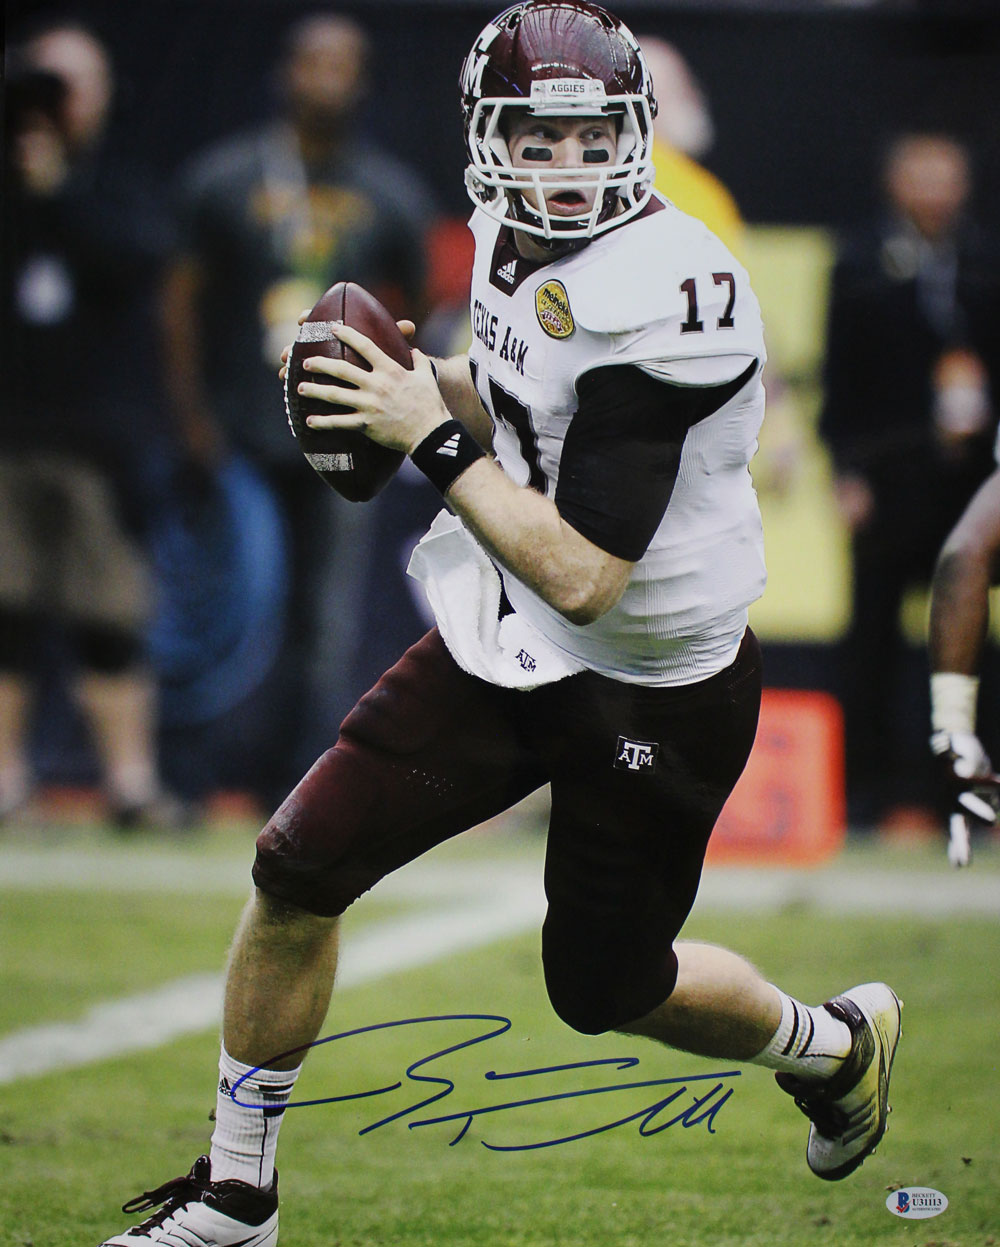 Ryan Tannehill Autographed/Signed Texas A&M Aggies 16x20 Photo BAS 29266